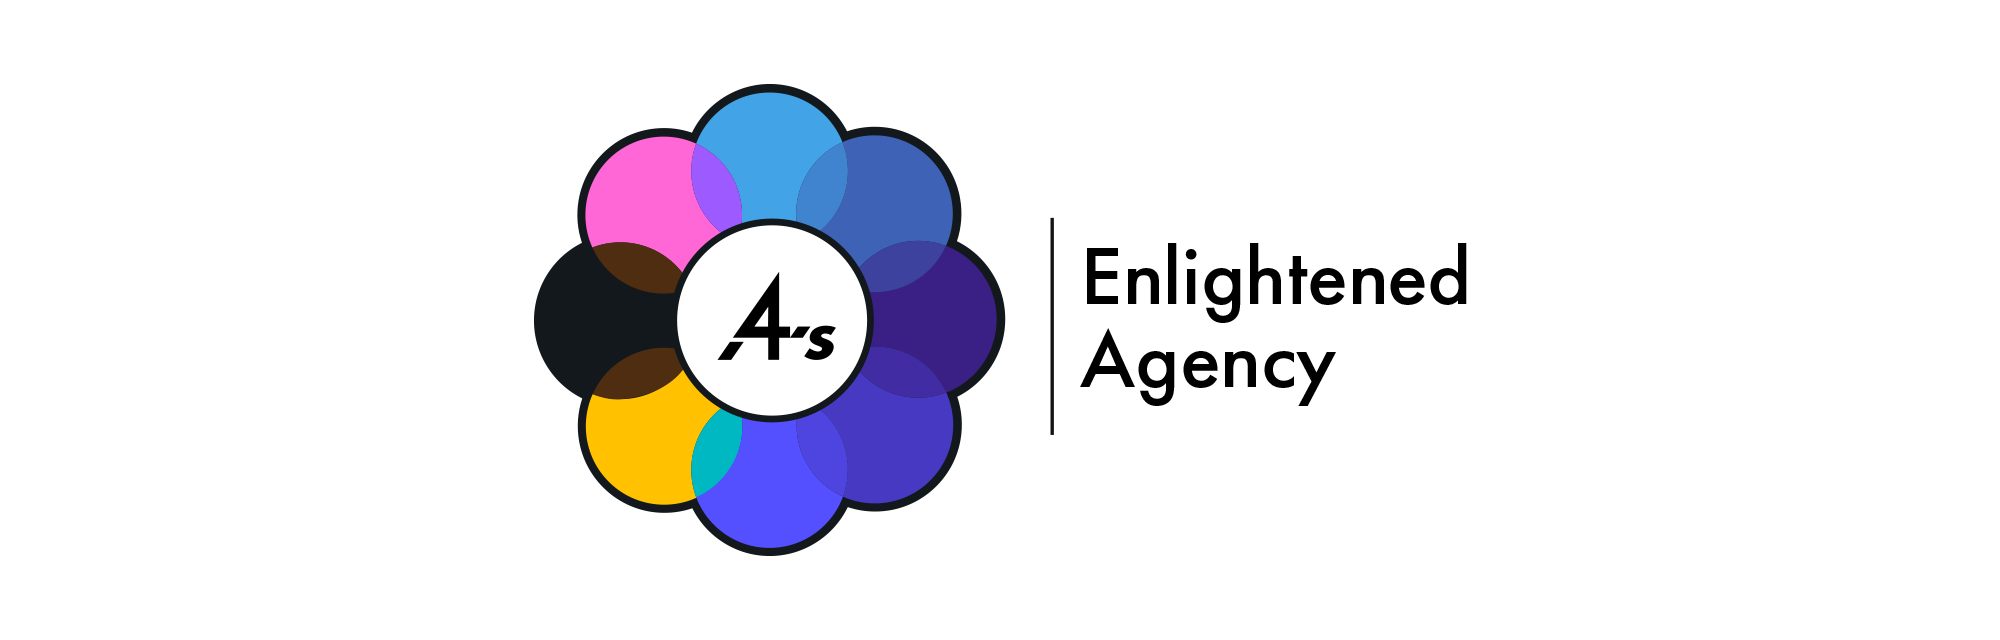 The 4A's Enlightened Agency Logos